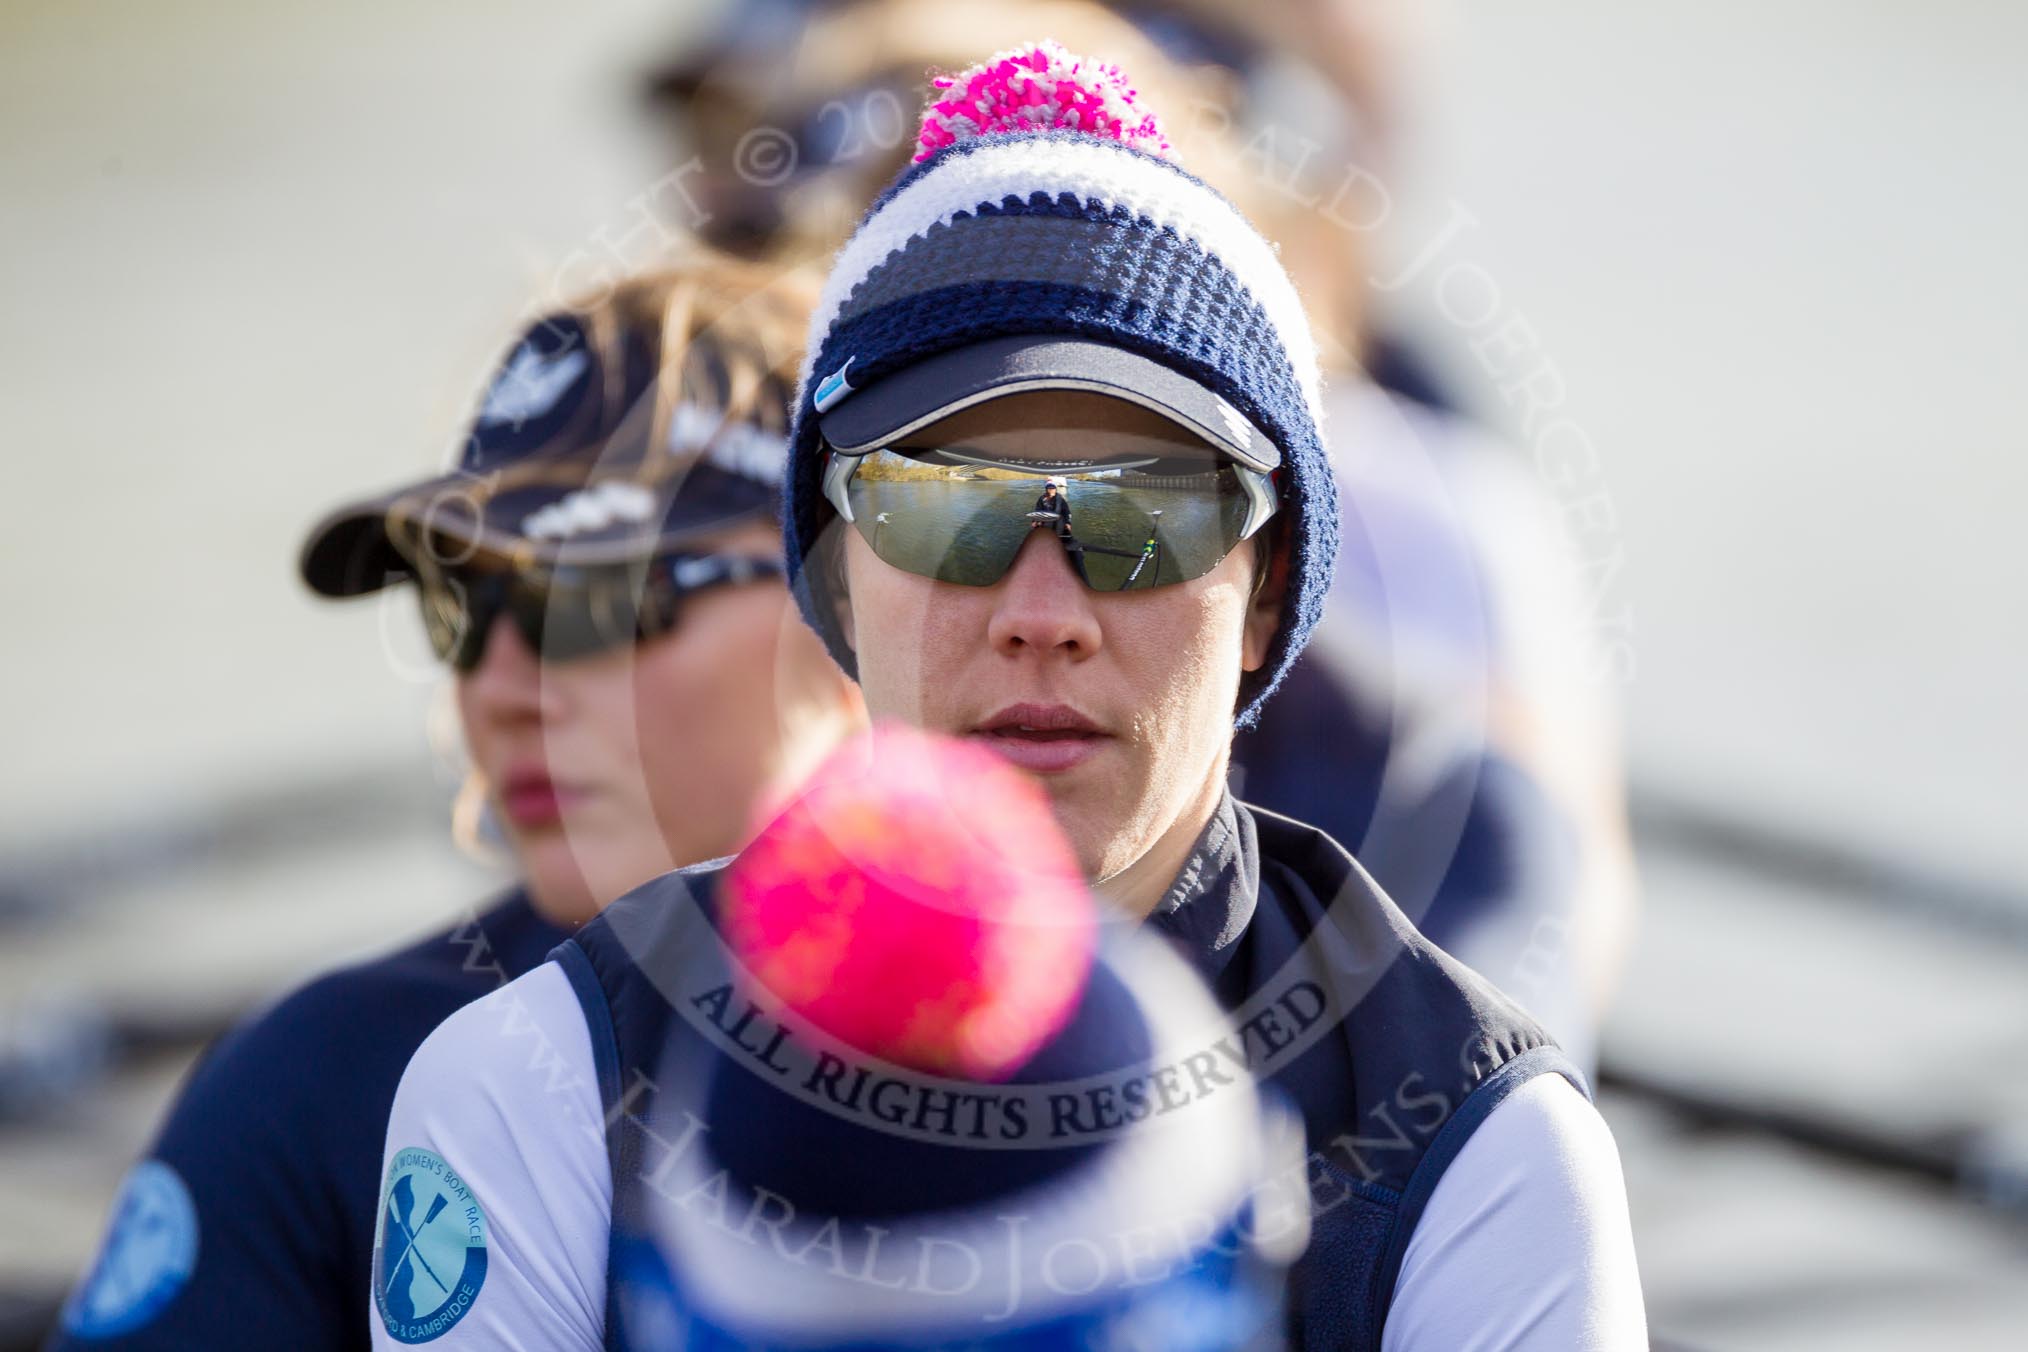 The Boat Race season 2015: OUWBC training Wallingford.

Wallingford,

United Kingdom,
on 04 March 2015 at 15:37, image #28